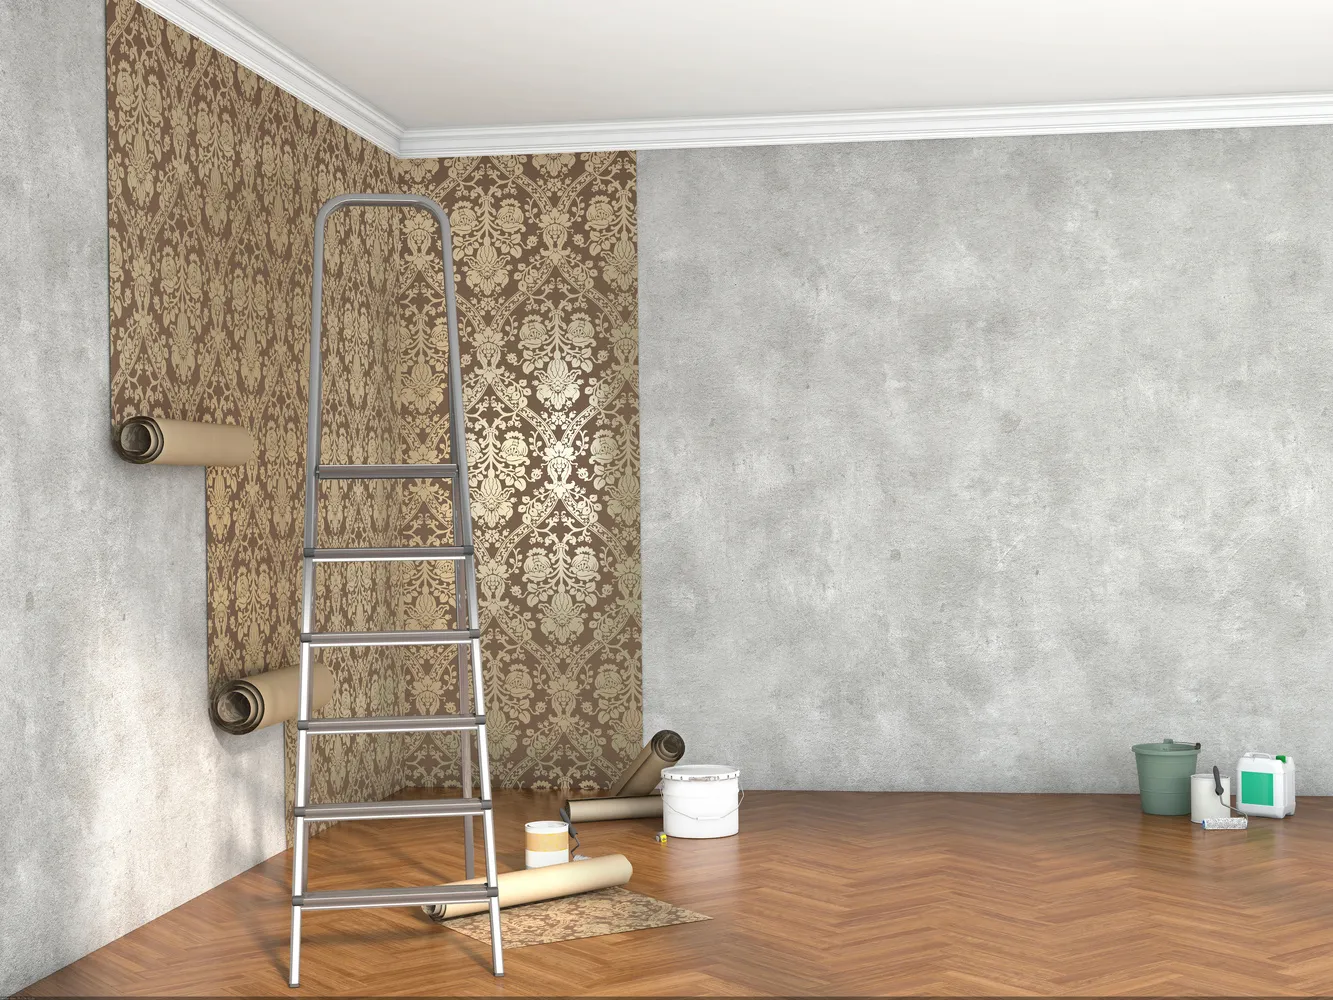 process of golden wallpaper installation in the room